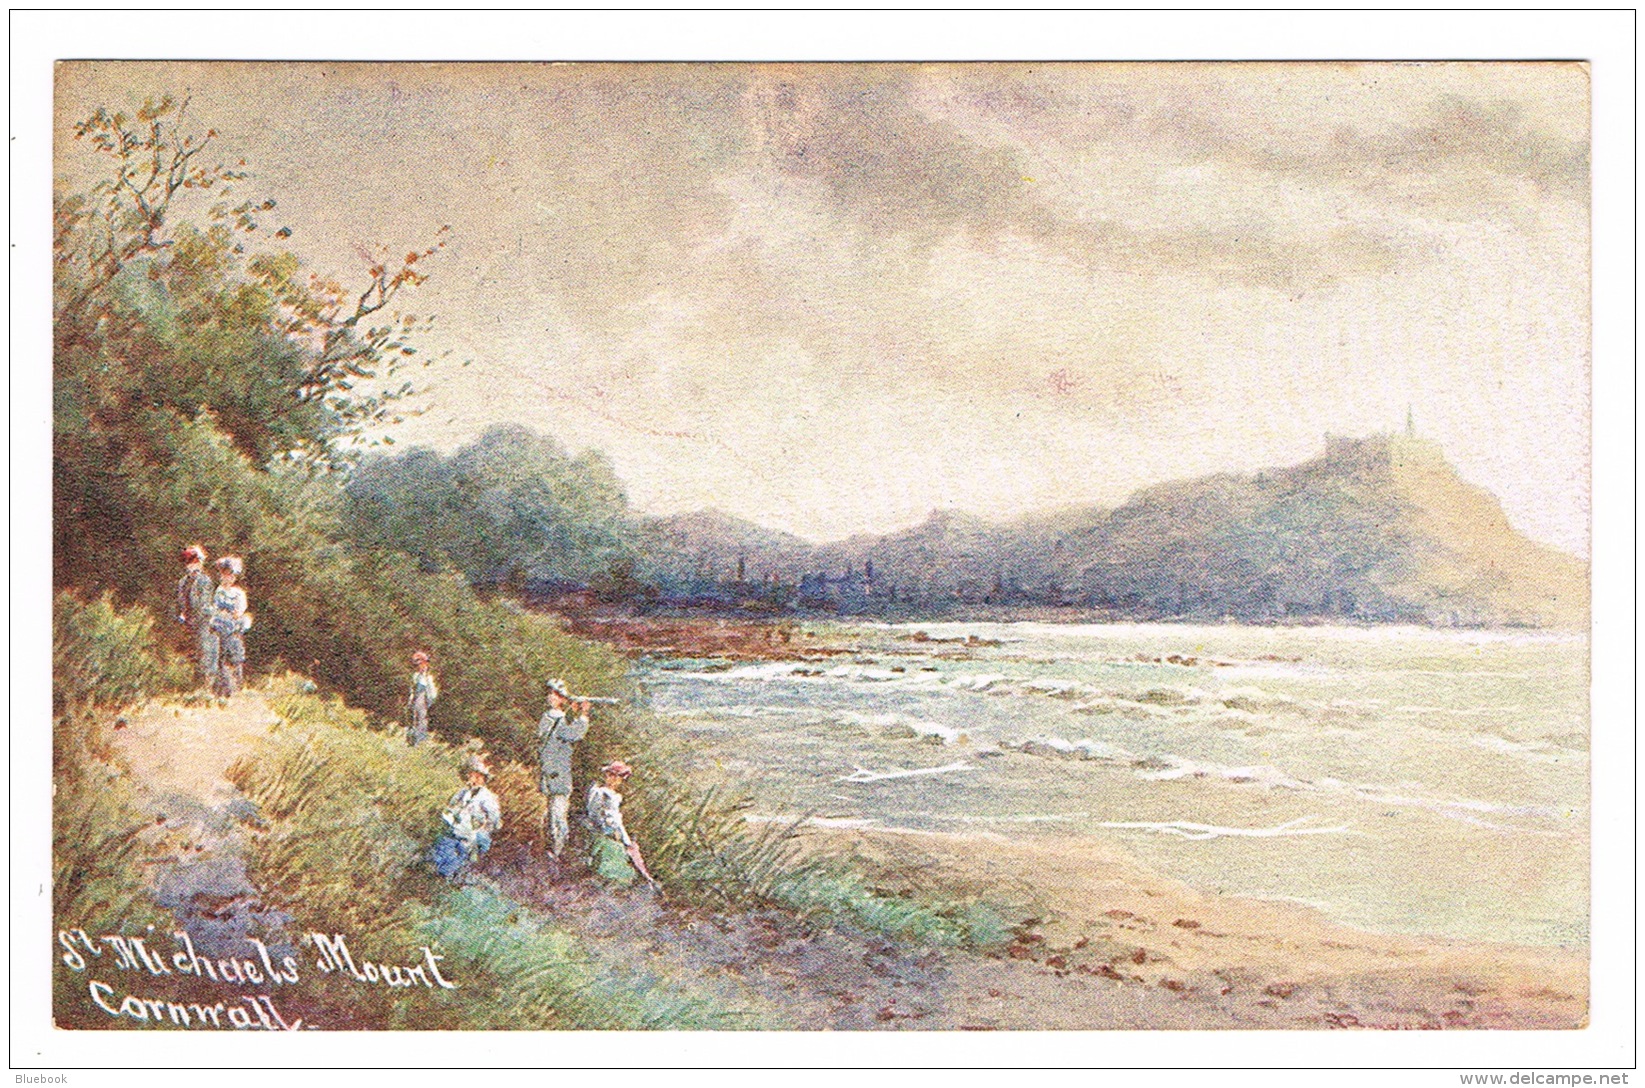 RB 1092 - Early Art Artist Signed Postcard - St Michaels Mount - Cornwall - St Michael's Mount